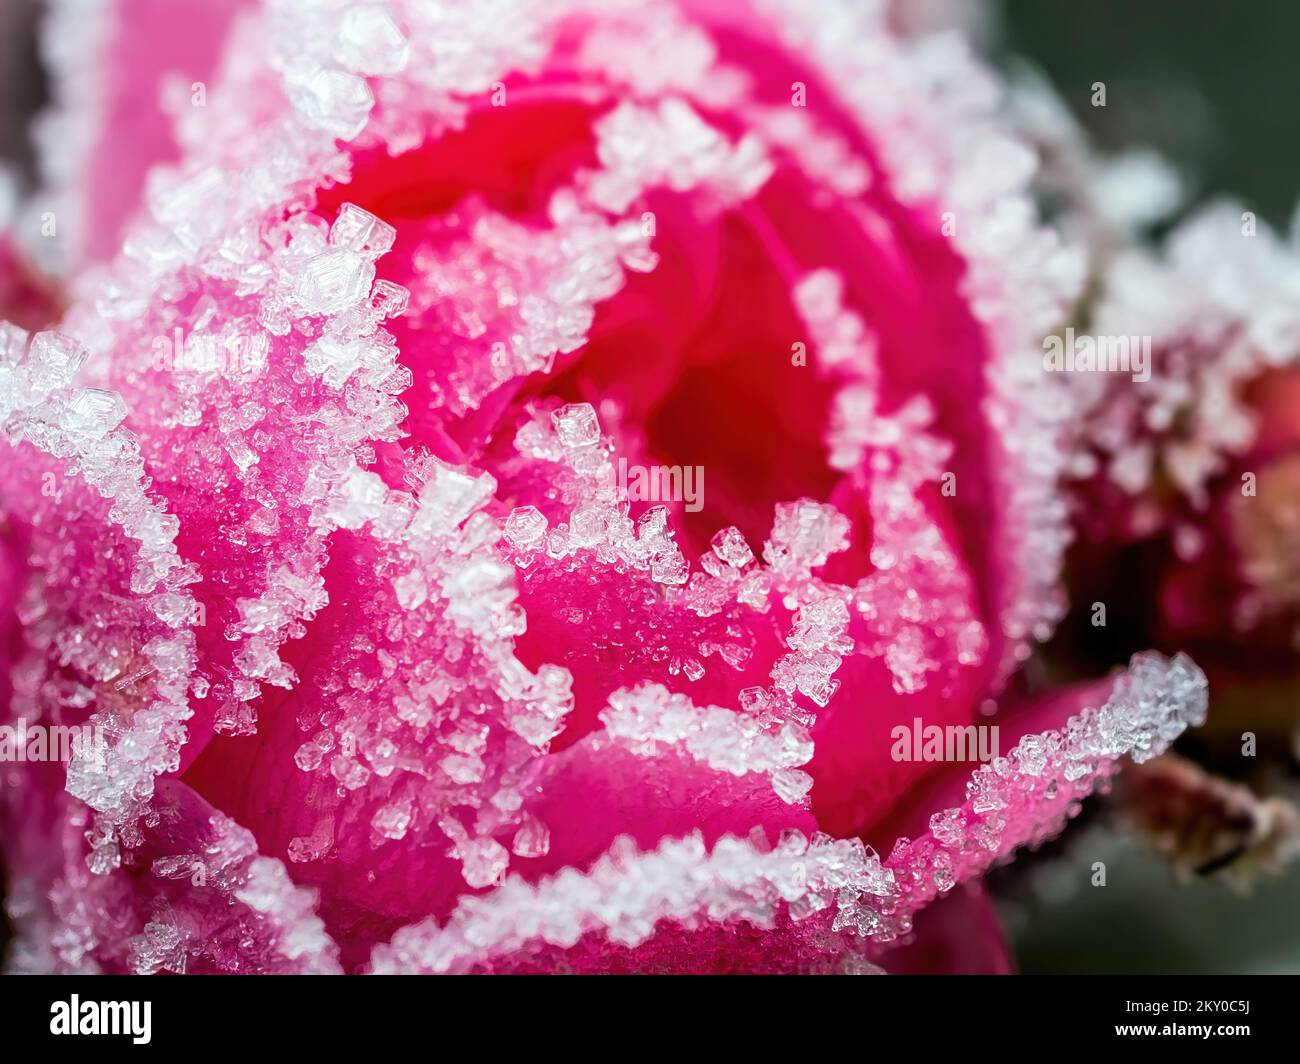 Extreme closeup of frosted red rose petals Stock Photo